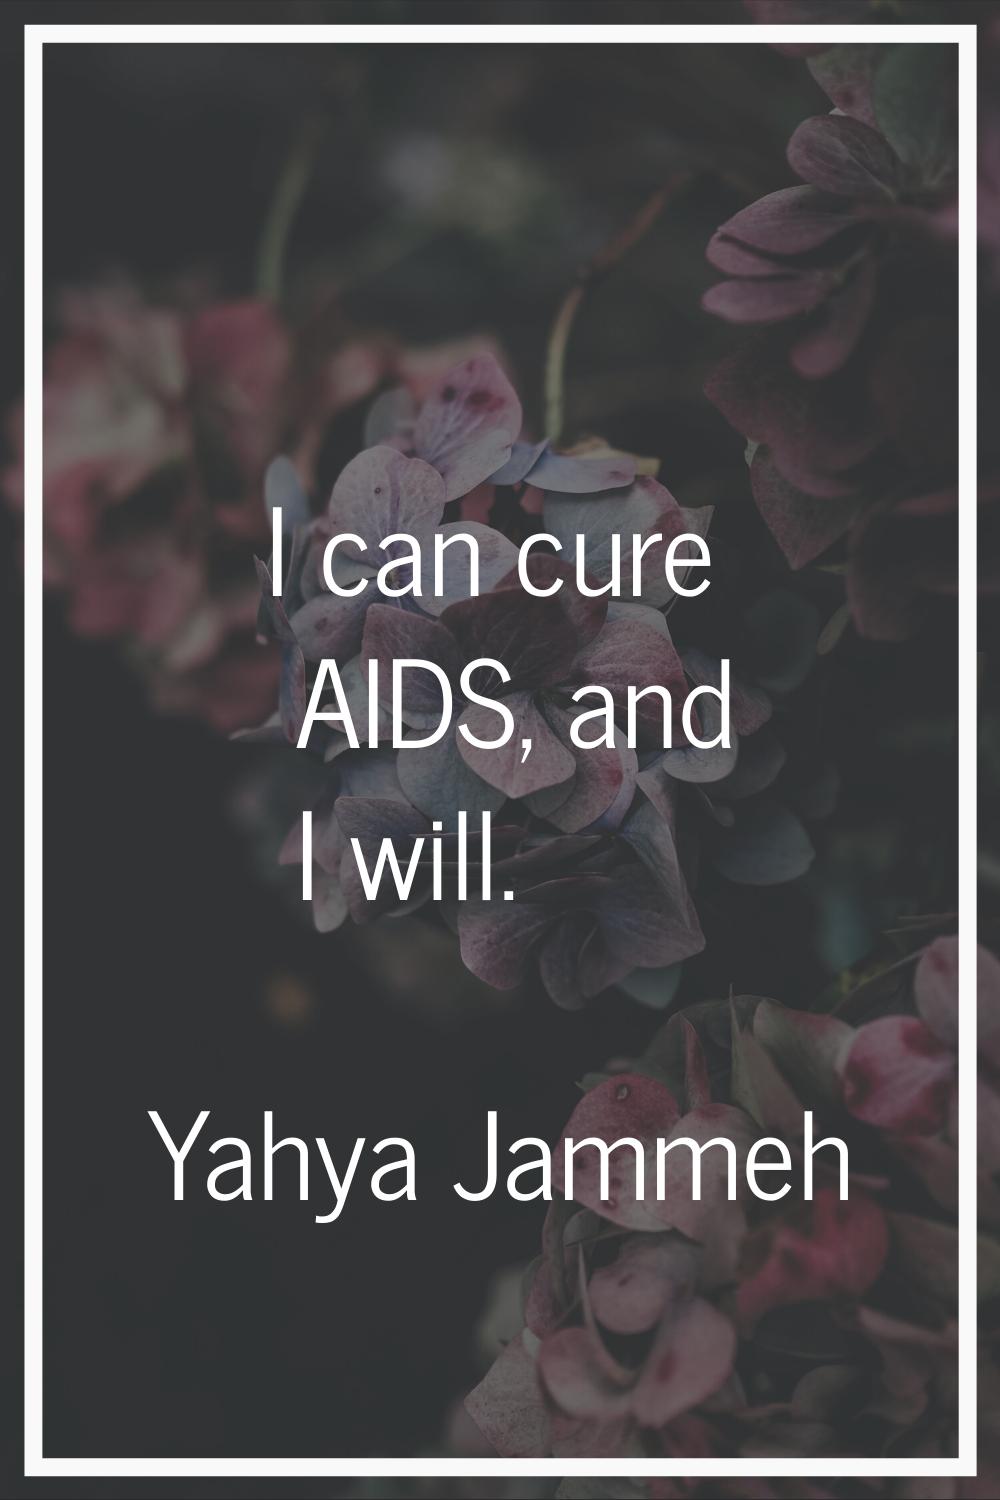 I can cure AIDS, and I will.